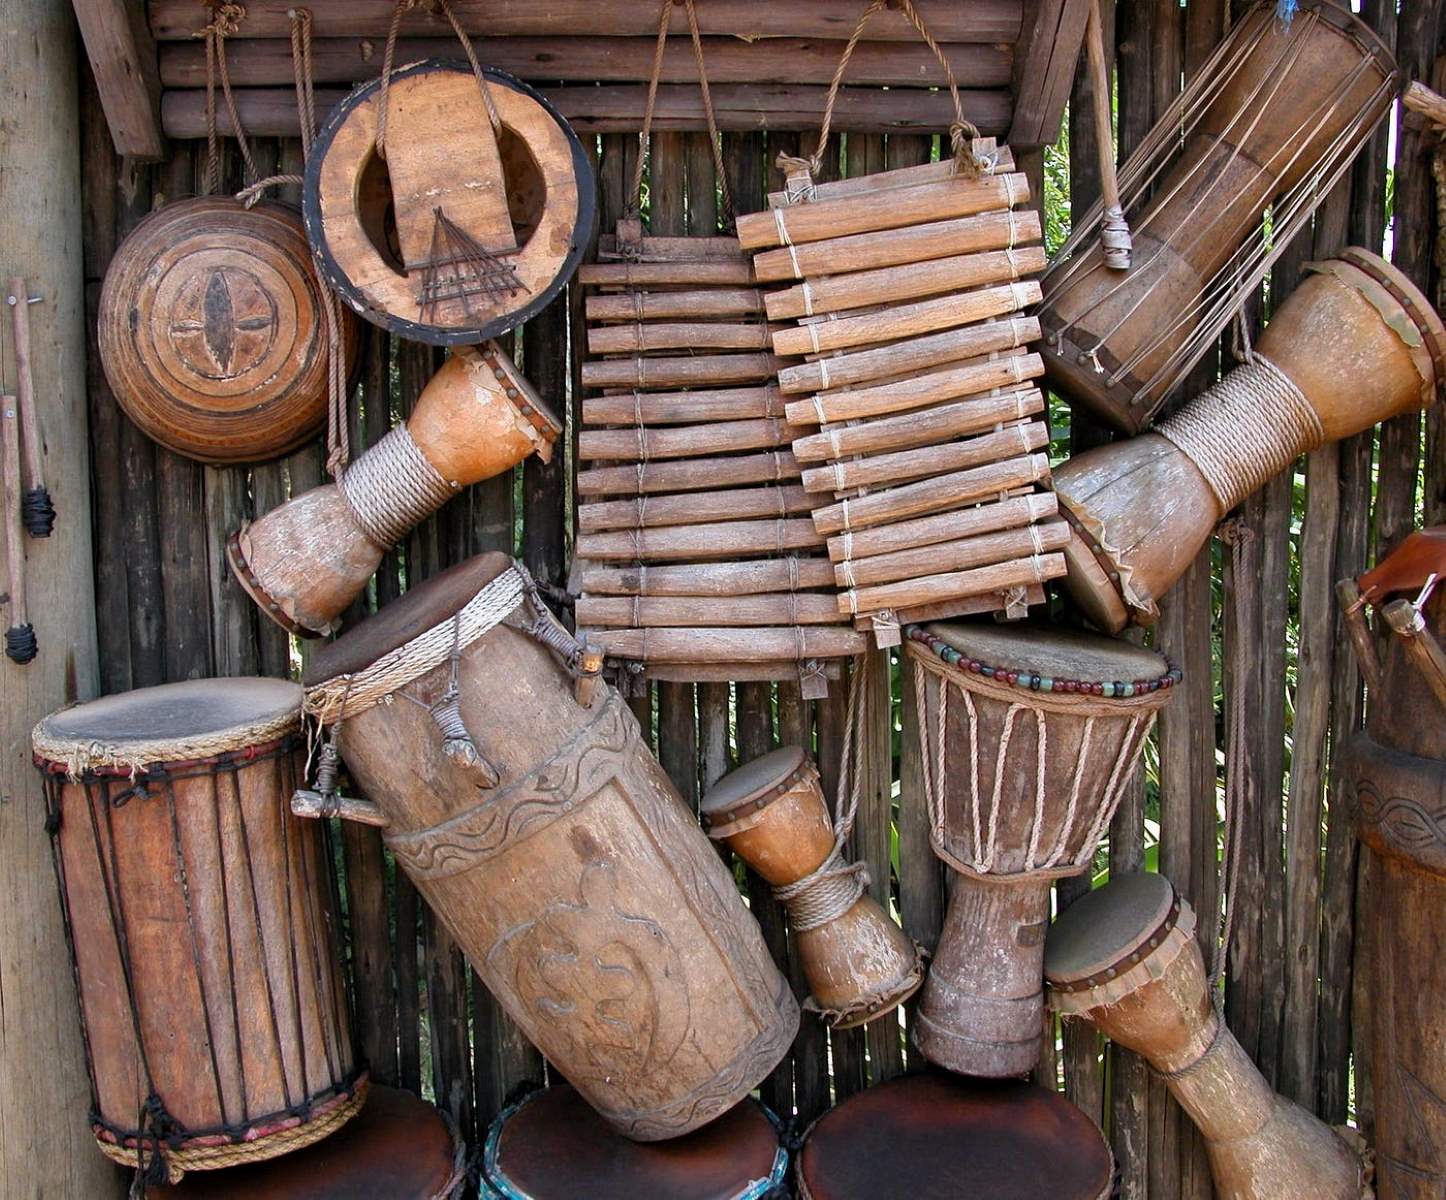 How Many Types Of African Drums Are There